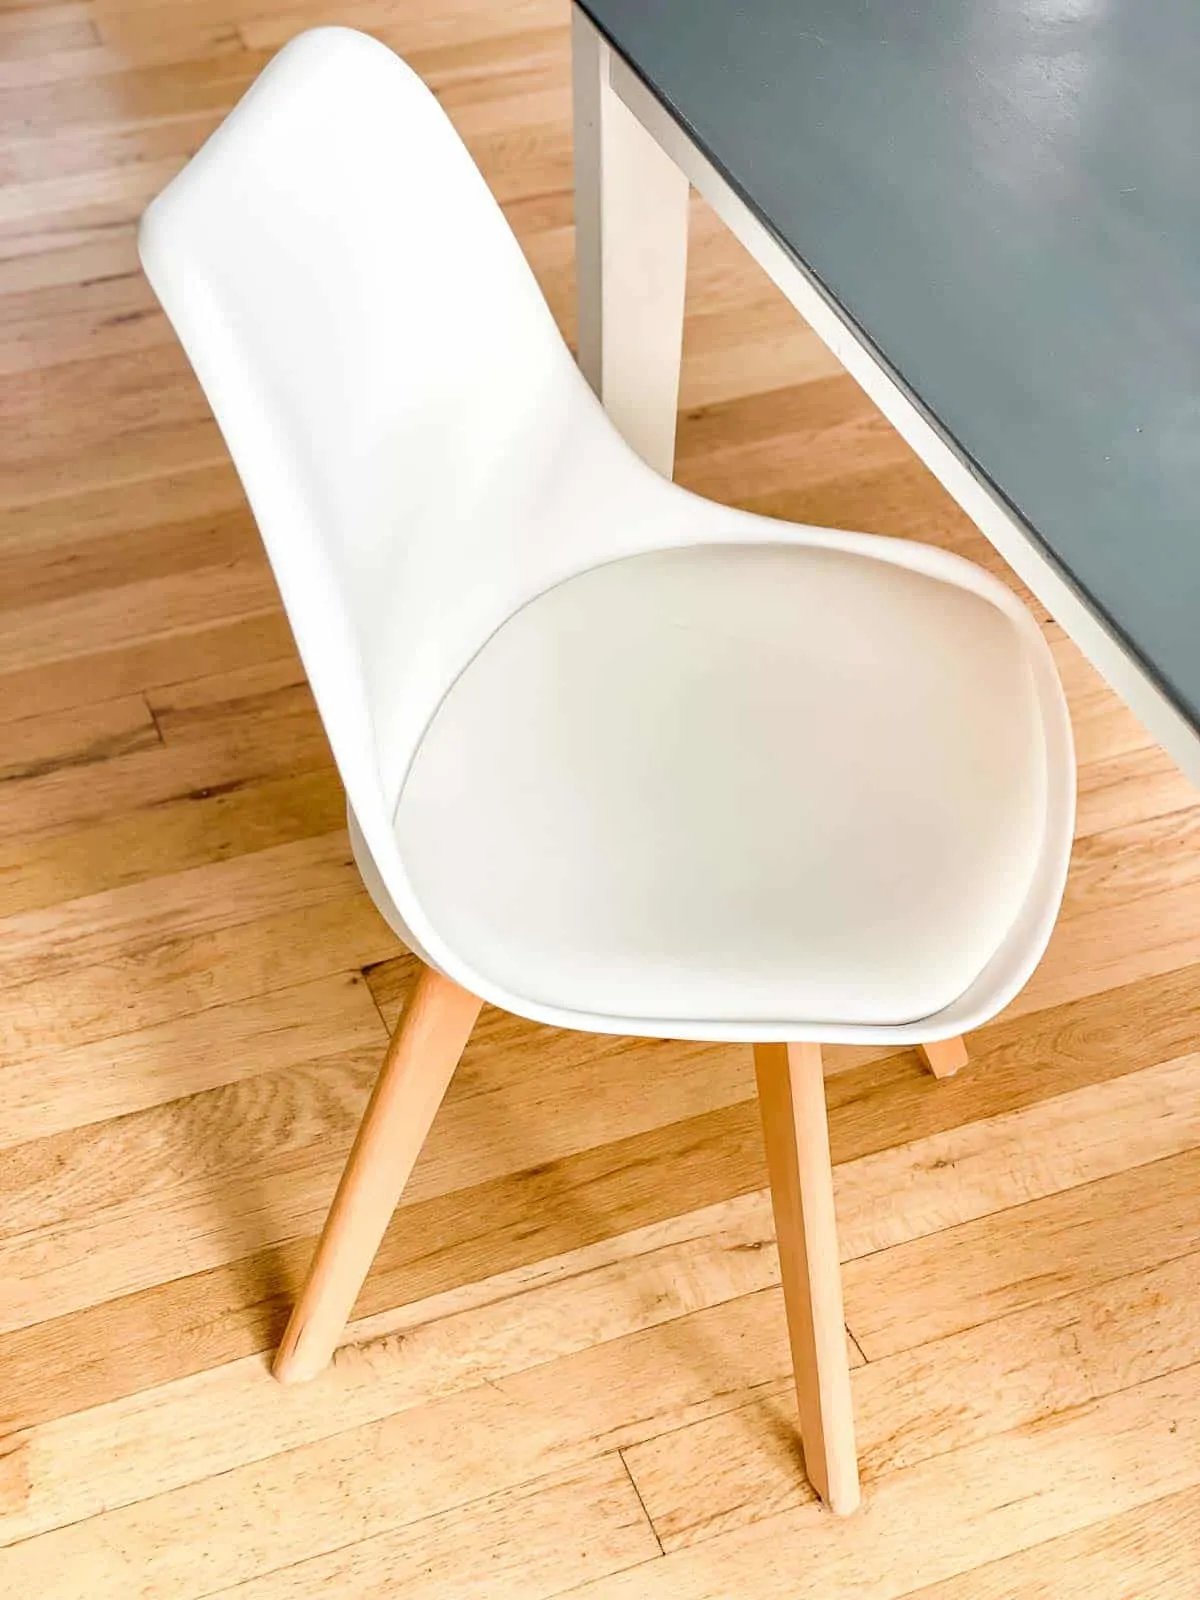 white midcentury modern tulip chair next to gray wood table